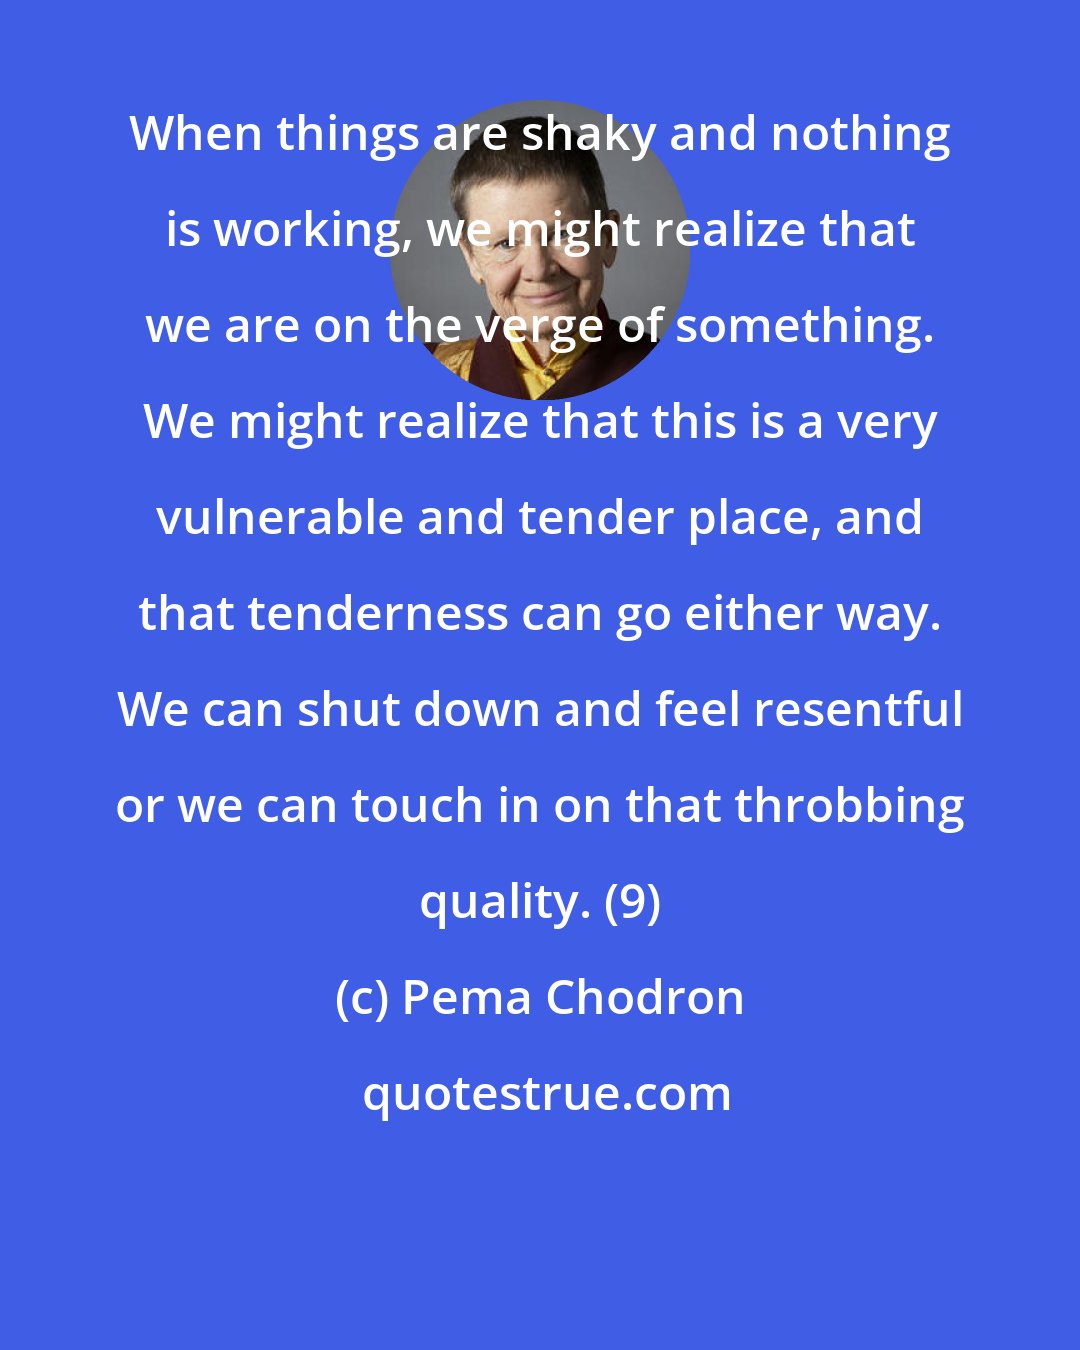 Pema Chodron: When things are shaky and nothing is working, we might realize that we are on the verge of something. We might realize that this is a very vulnerable and tender place, and that tenderness can go either way. We can shut down and feel resentful or we can touch in on that throbbing quality. (9)